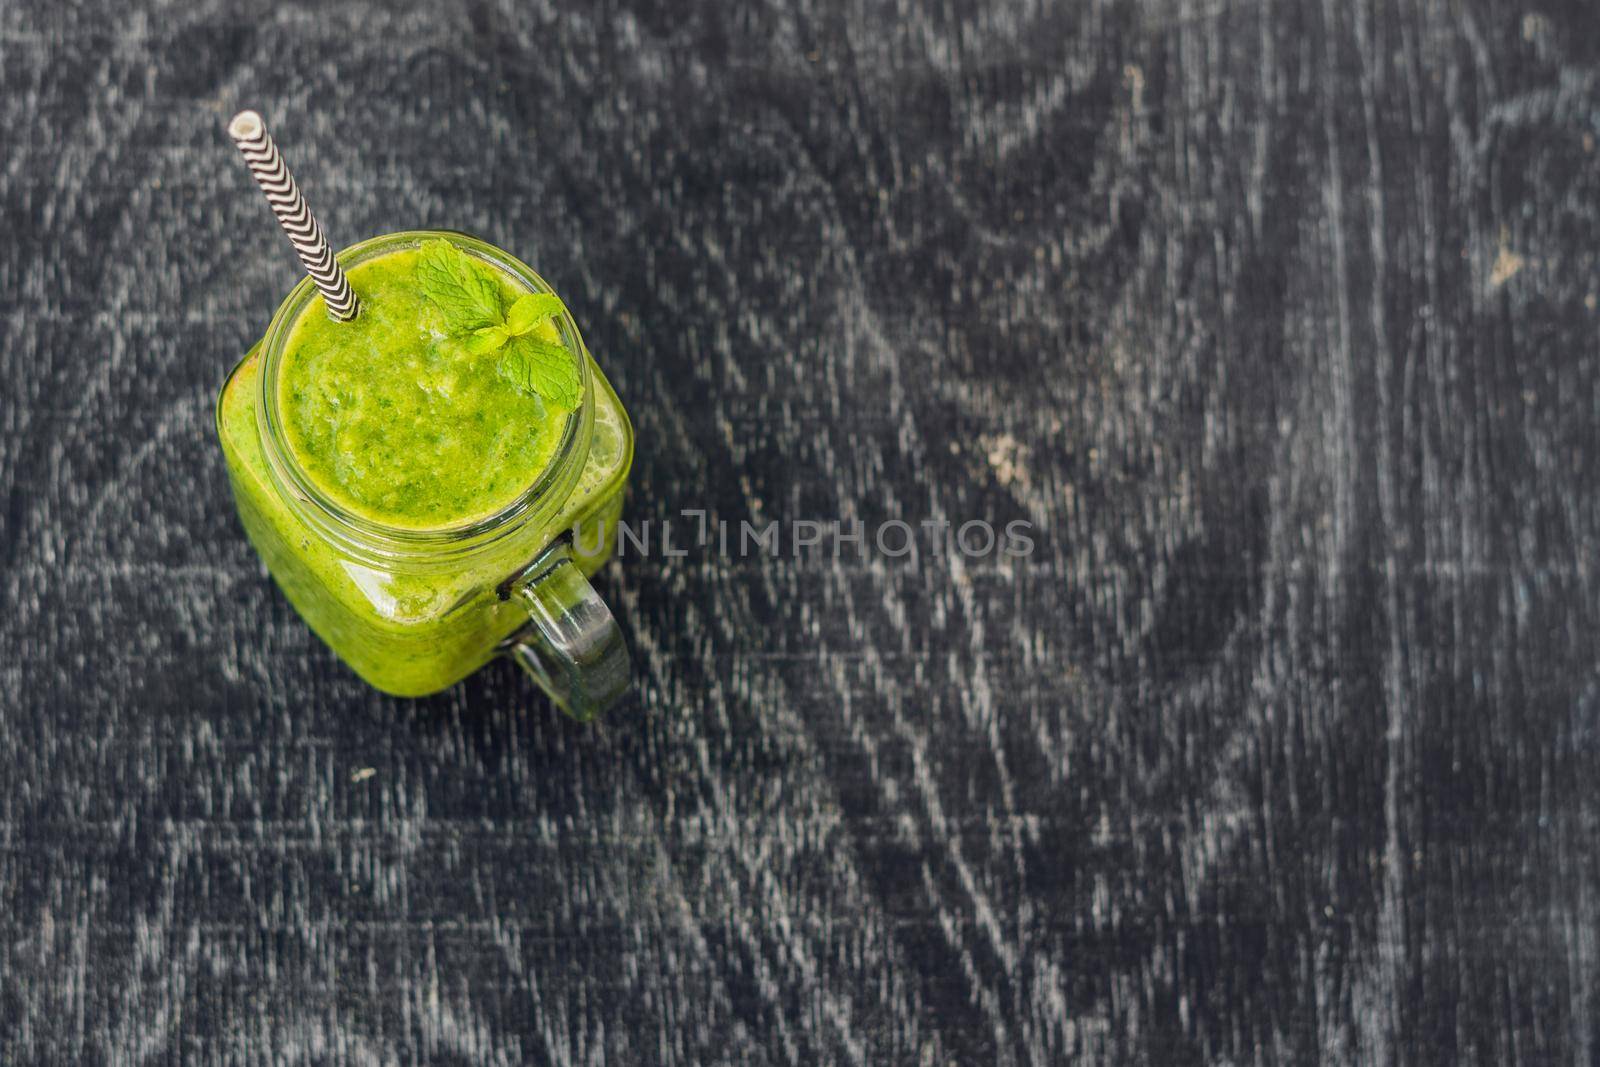 Green smoothies made of spinach. Healthy eating and sports concept.